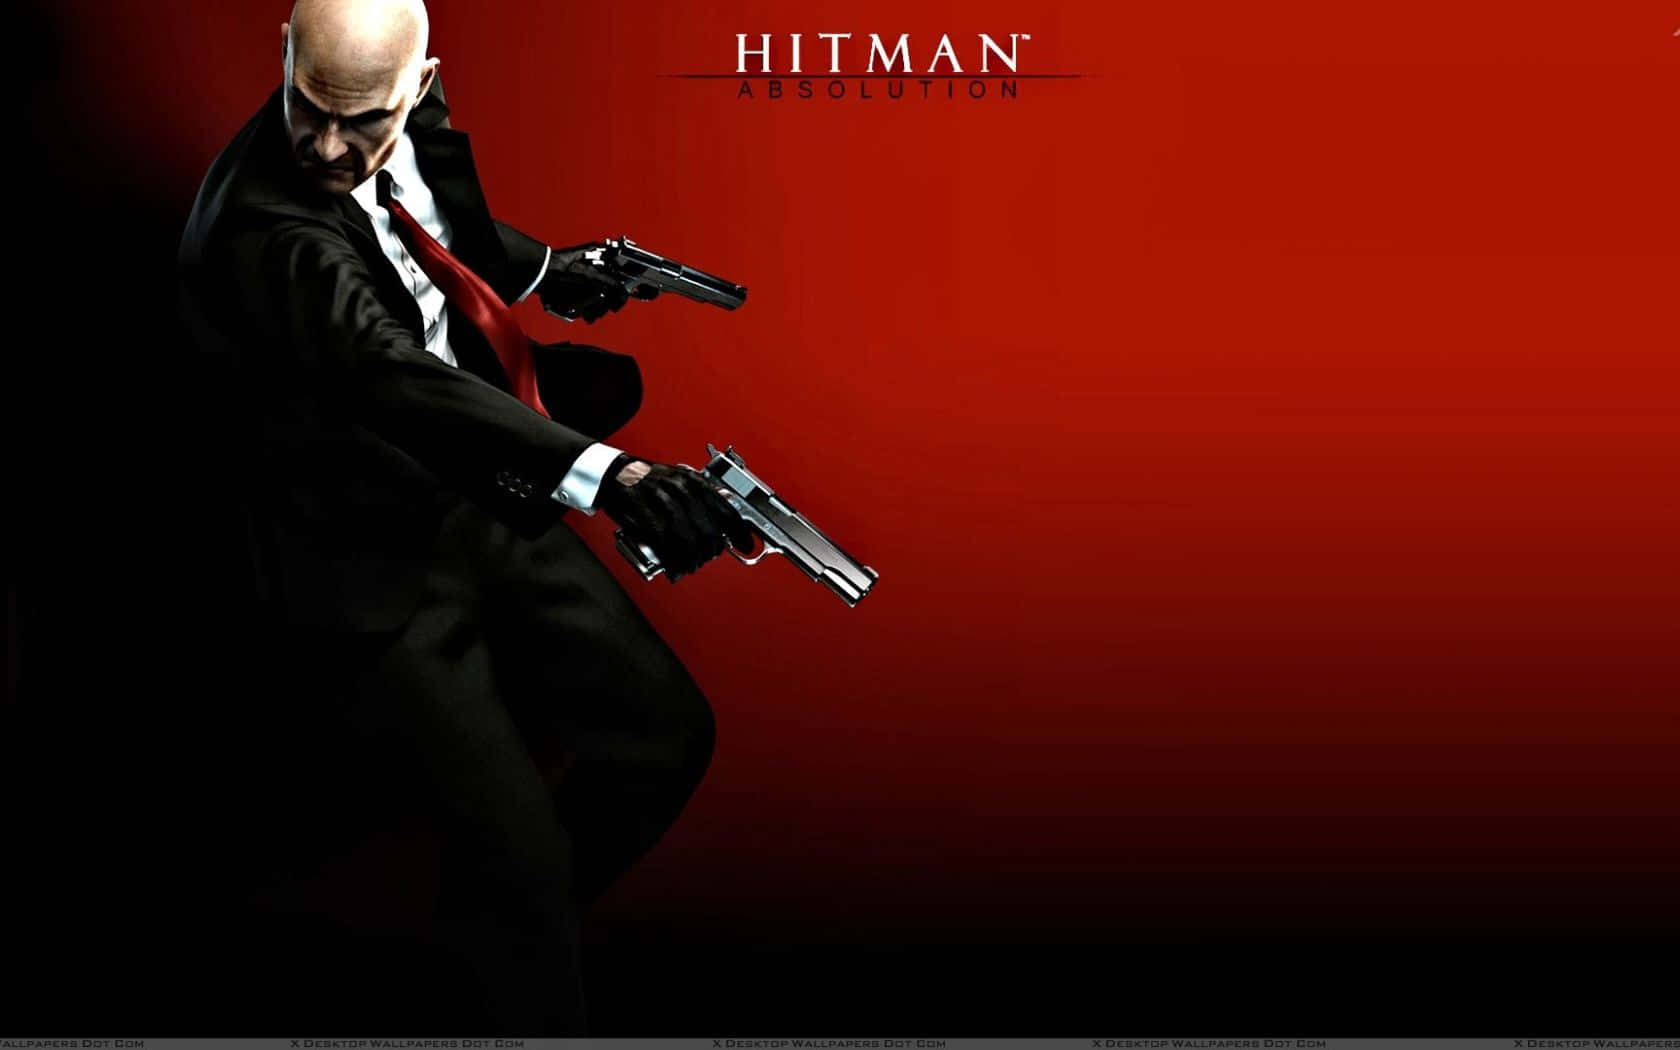 Join Agent 47 on his mission of vengeance in Hitman Absolution.